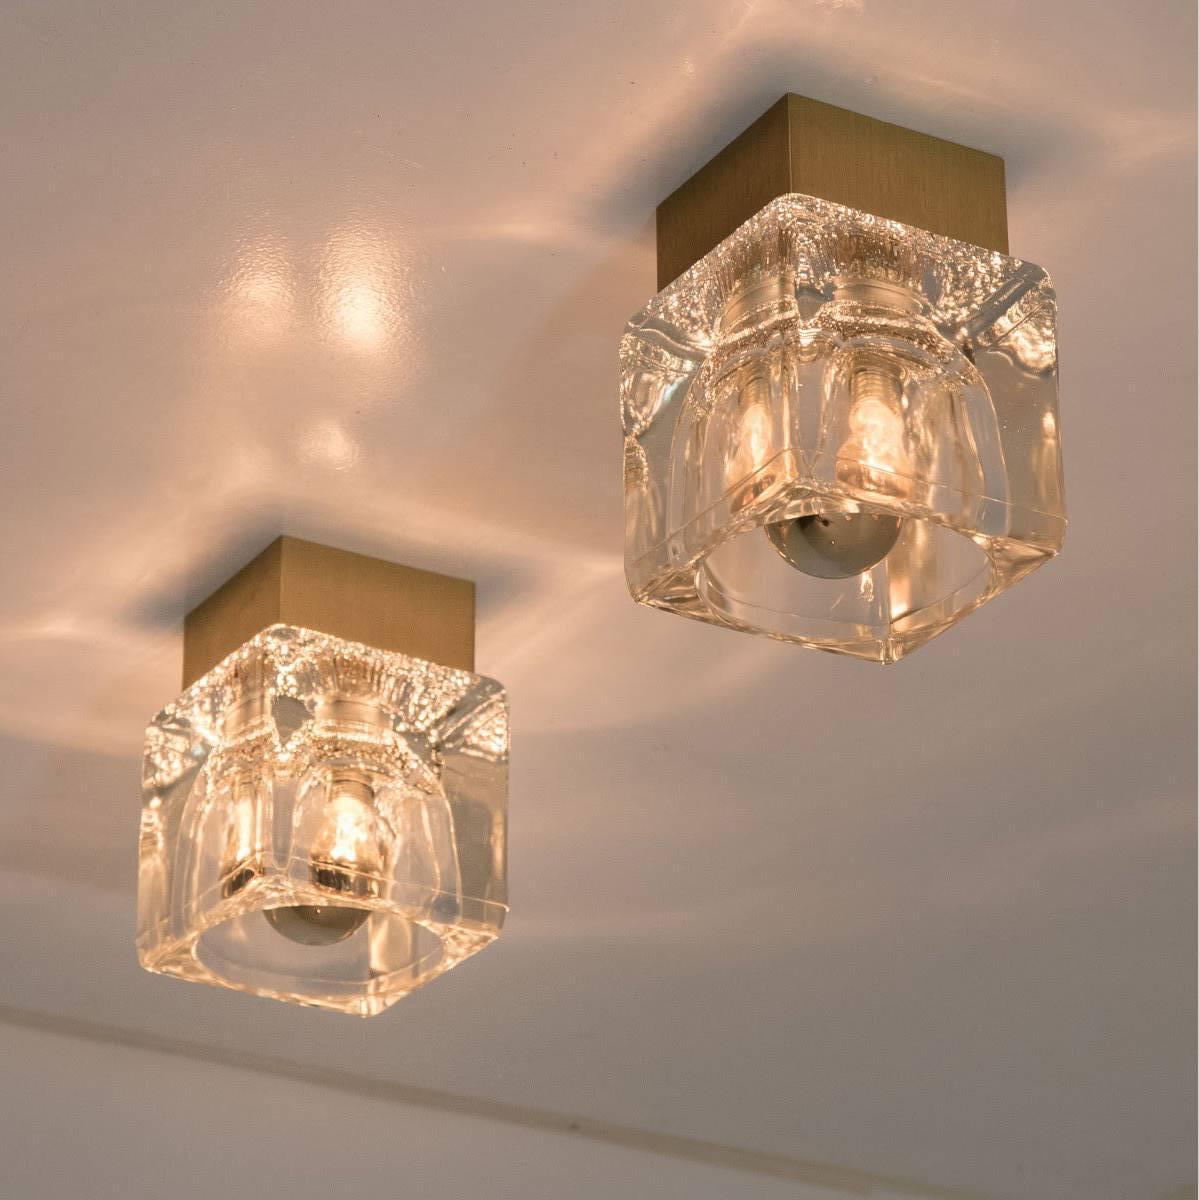 Several high quality Peill & Putzler wall lights brass and glass cubes, circa 1970s, Germany. This sculptural ceiling lights from Peill & Putzler consists 1 clear illuminated glass cube on a square brass frame.

The glass cube beautifully reflects a